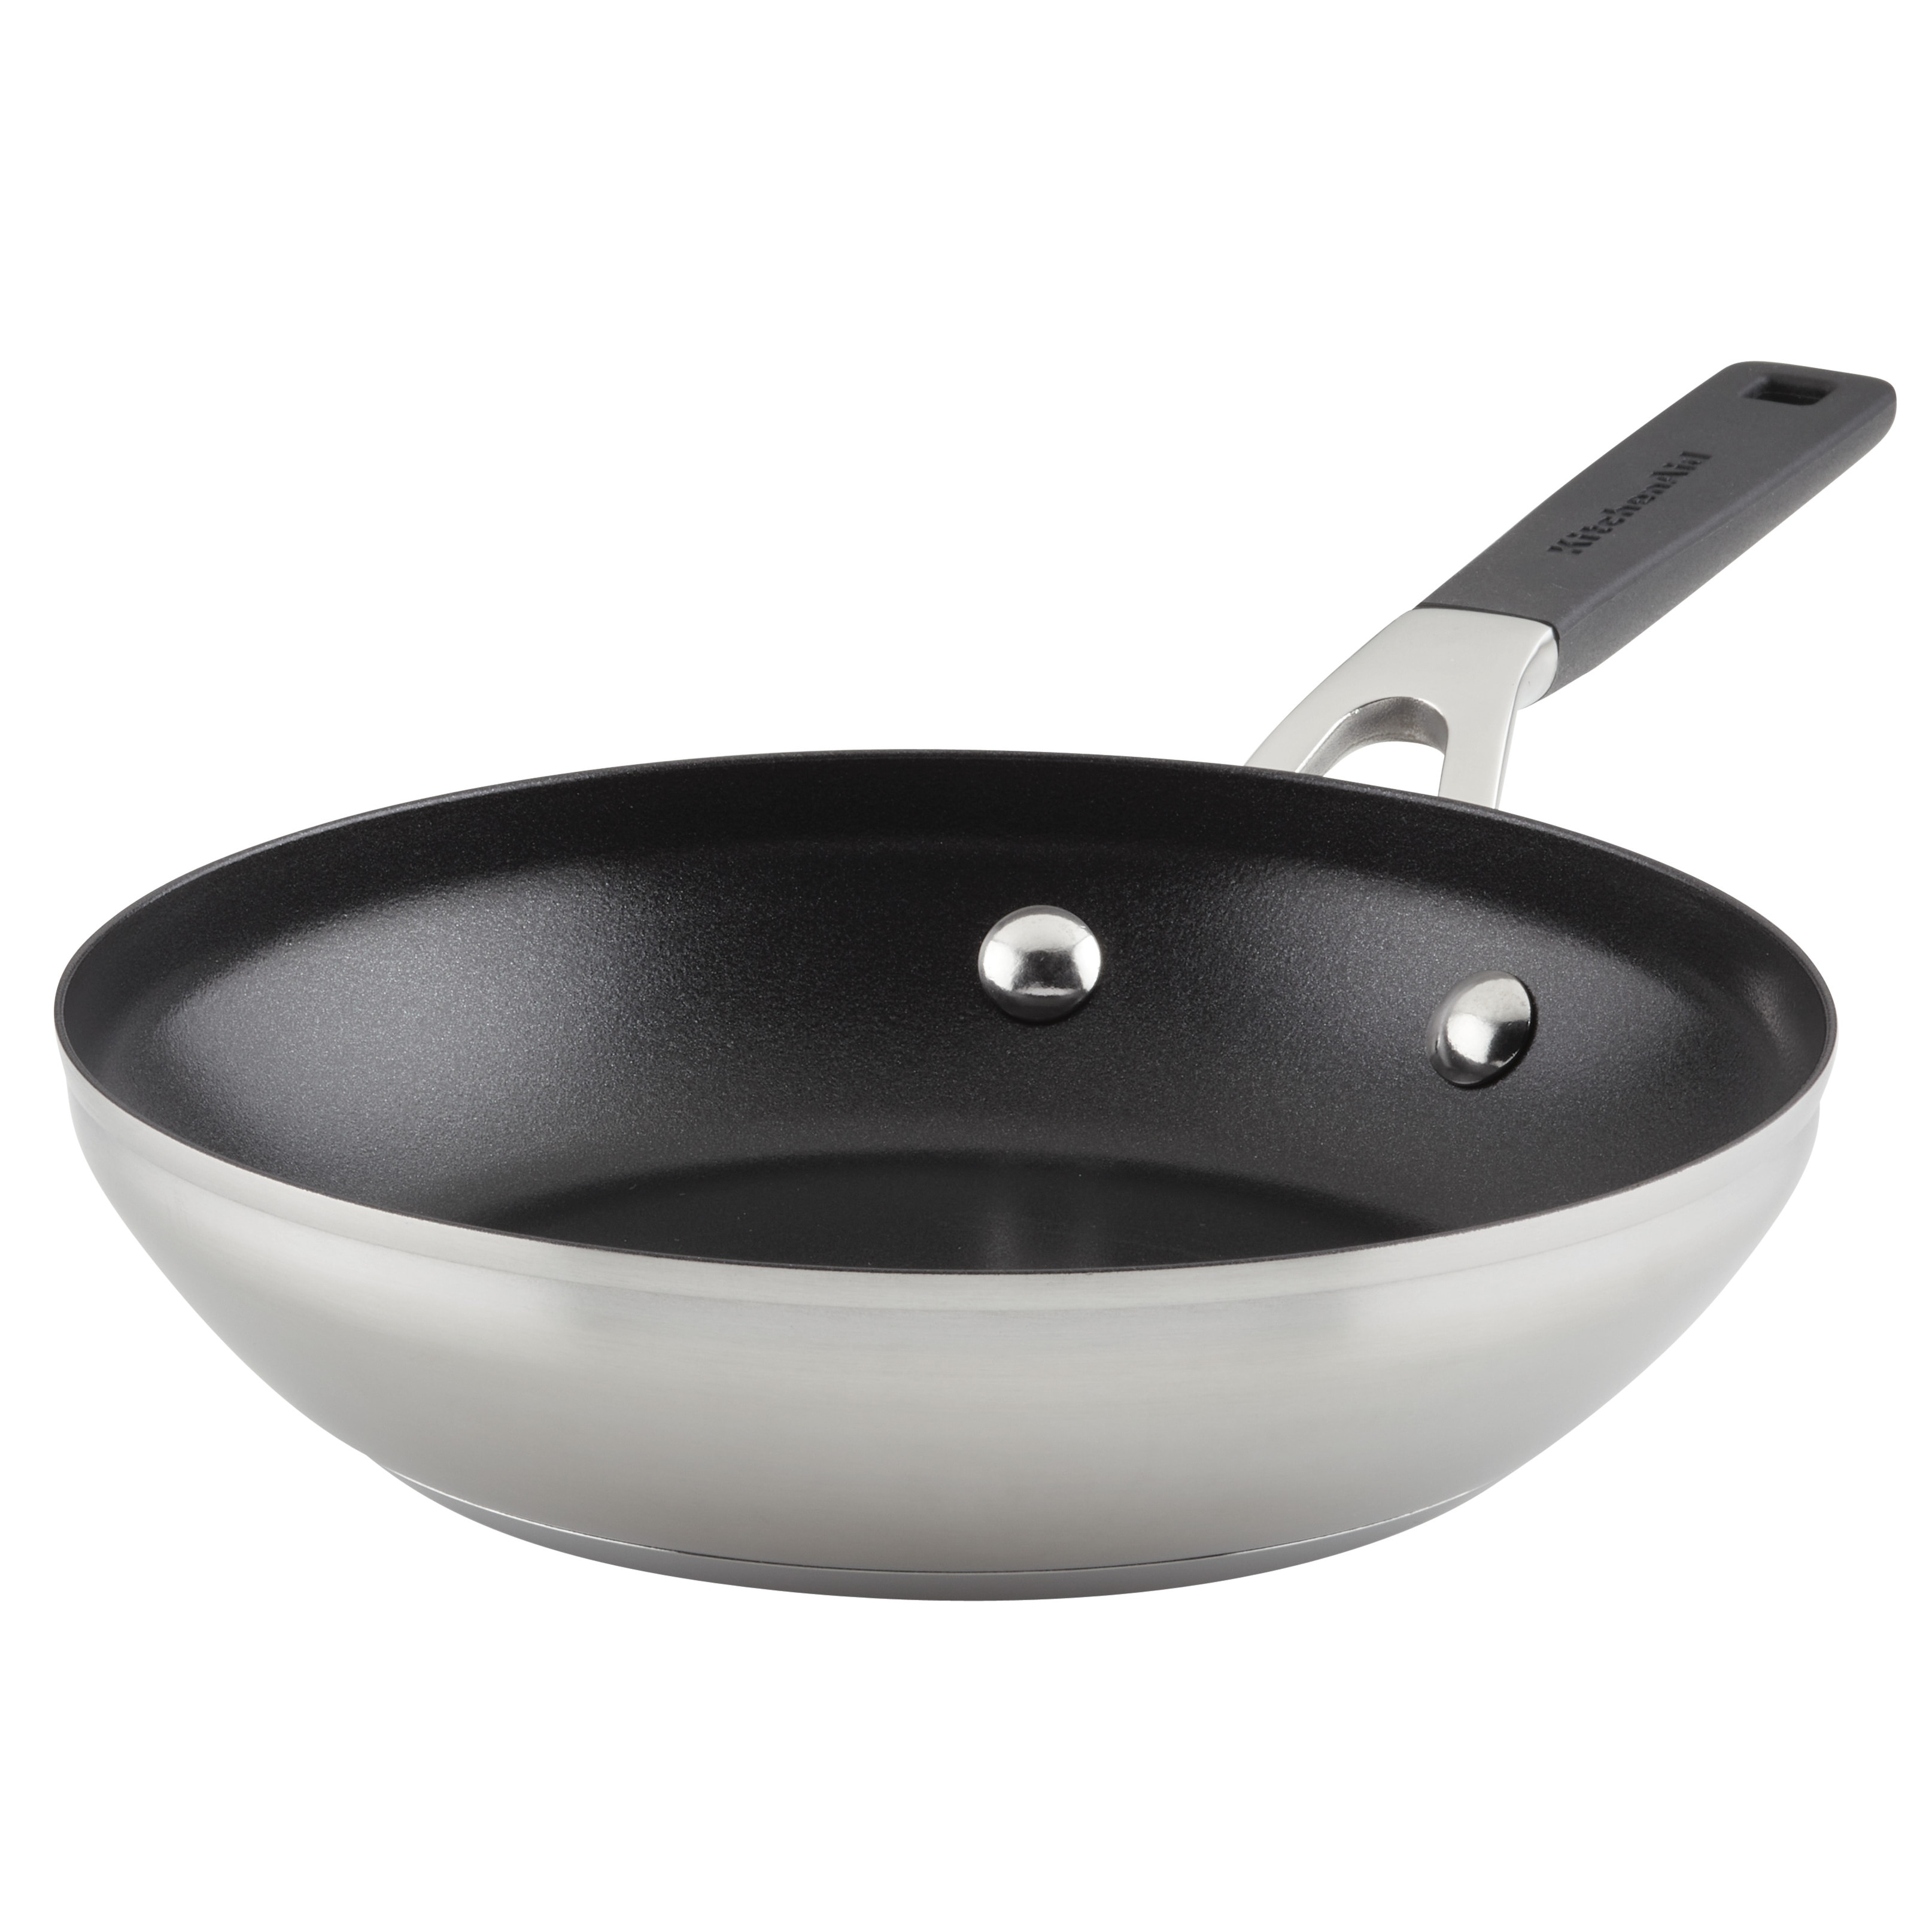 https://ak1.ostkcdn.com/images/products/is/images/direct/51bd4ae896bb21f4c469f1aaf3349a2dde833f81/KitchenAid-Stainless-Steel-Nonstick-Induction-Frying-Pan%2C-8-Inch%2C-Brushed-Stainless-Steel.jpg